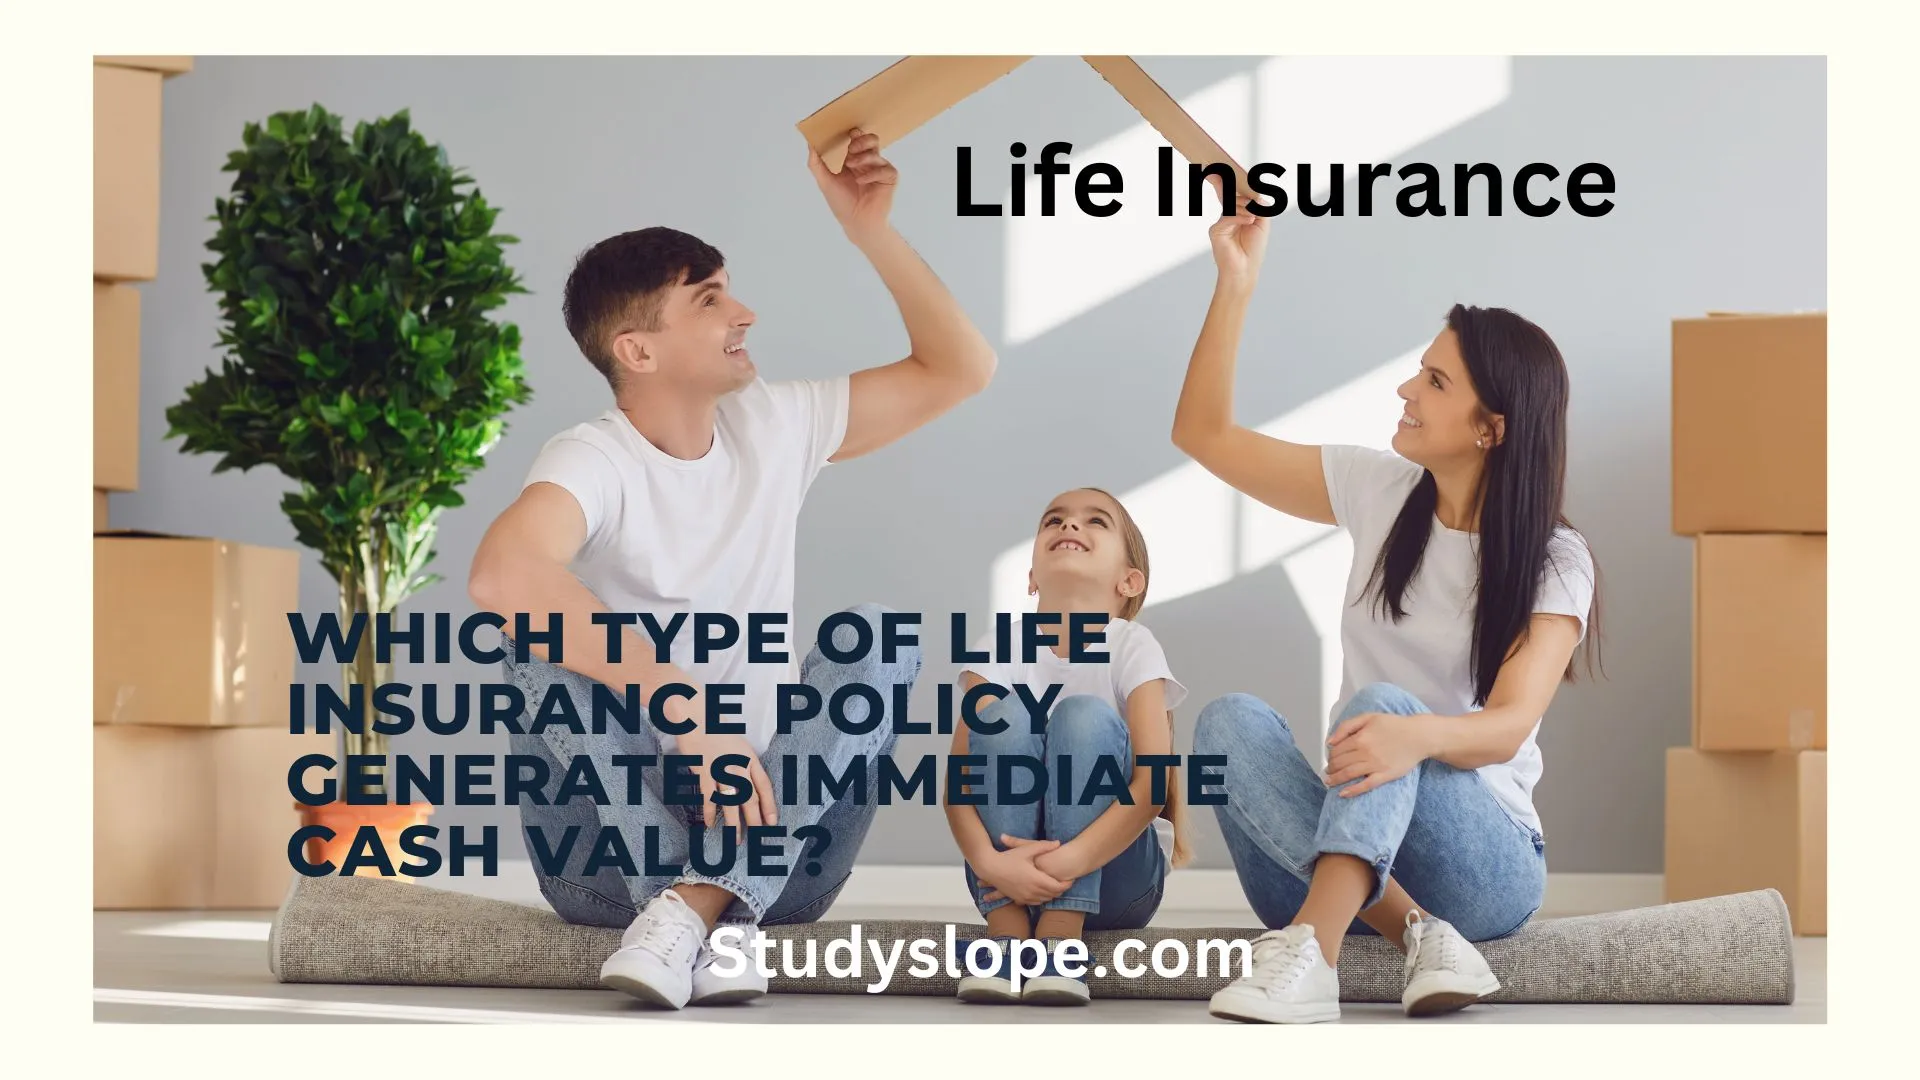 Life insurance policy that generates immediate cash